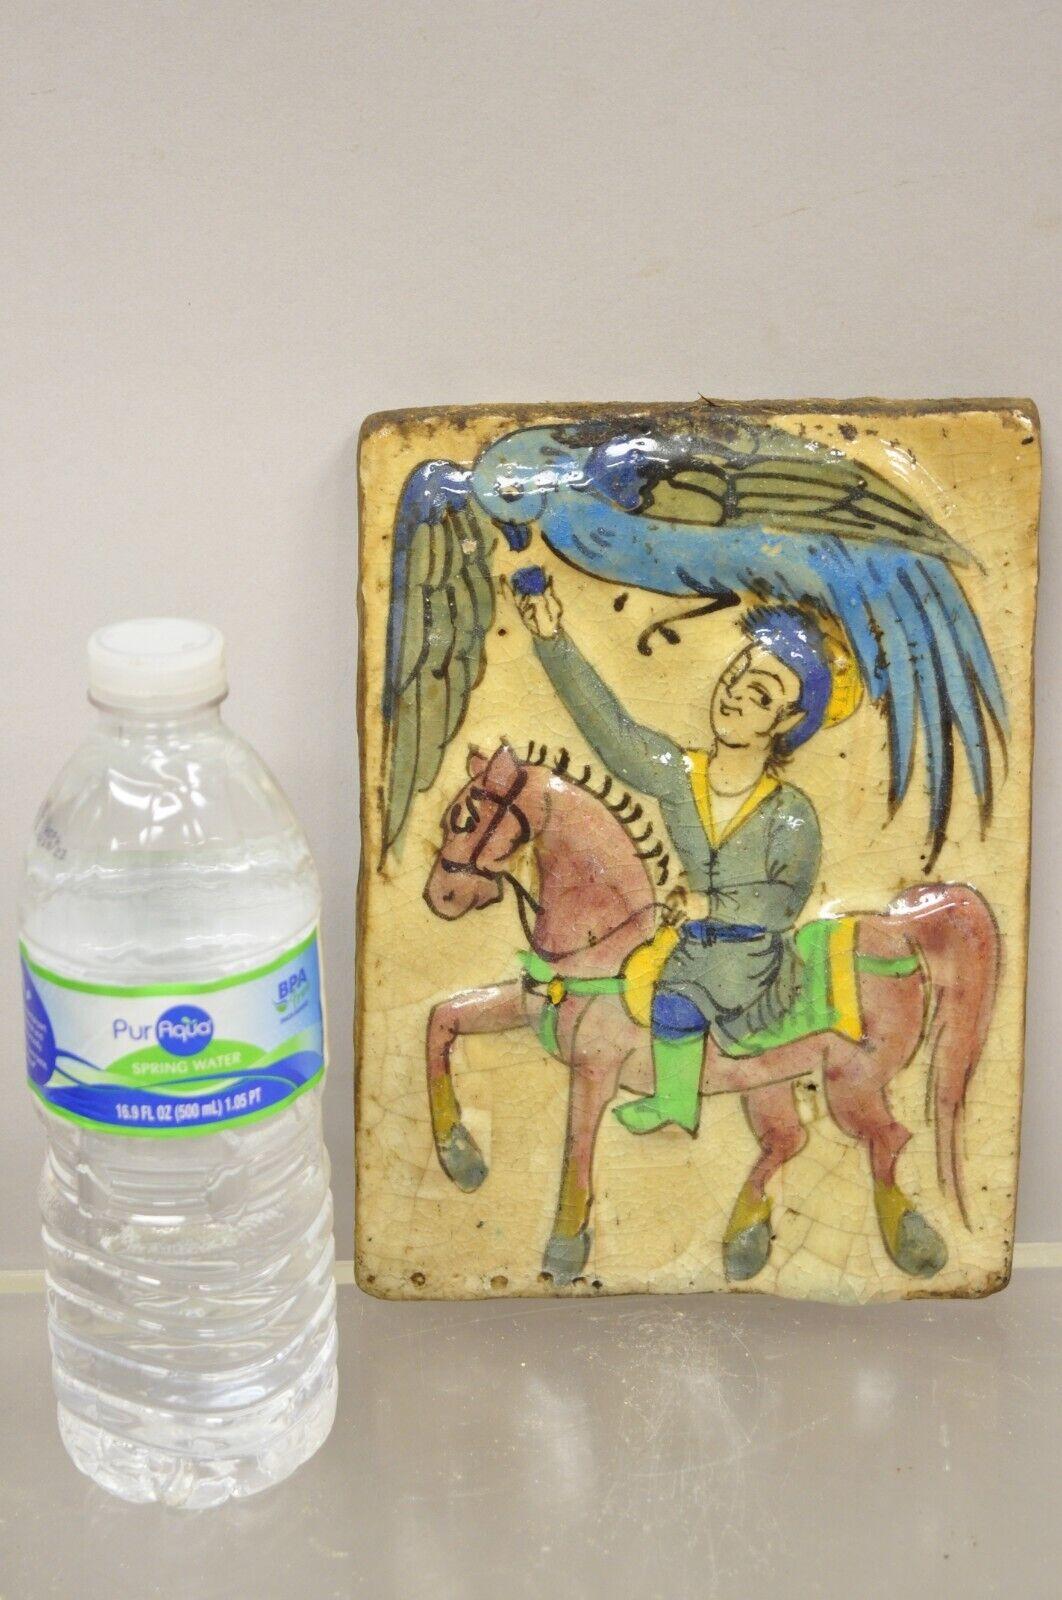 Antique Persian Iznik Qajar style ceramic pottery beige tile Phoenix bird and horse Rider C4. Item features original crackle glazed finish, heavy ceramic pottery construction, very impressive detail, wonderful style and form. Great to mount as wall